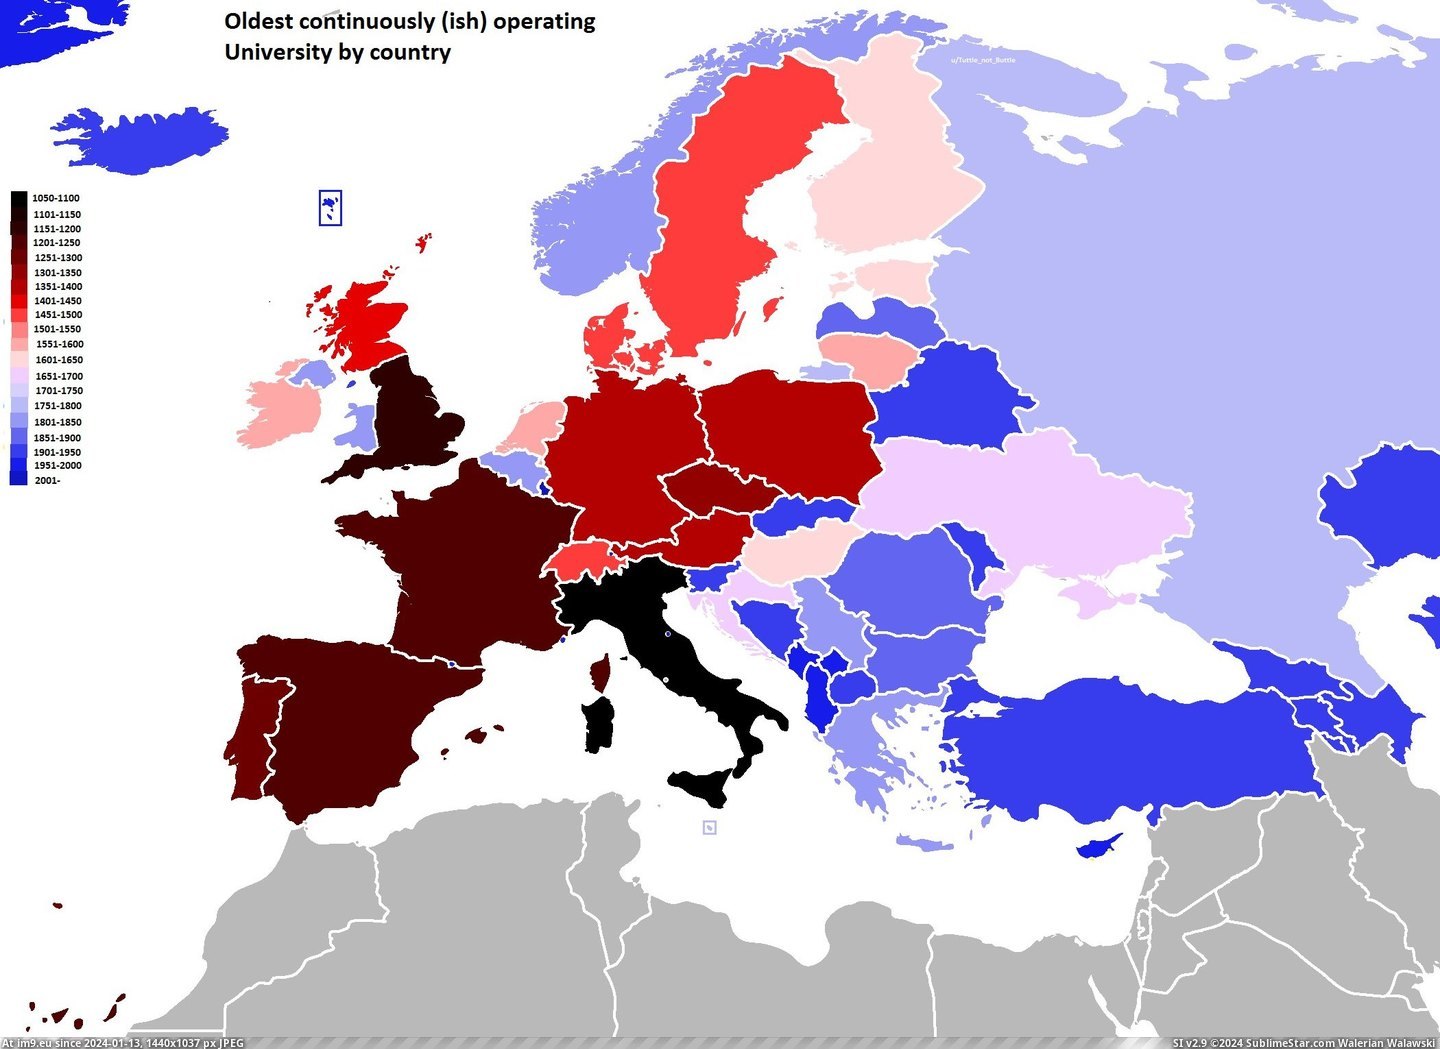 #European #Countries #University #Operating #Continuously #Oldest #2100x1525 #Establishment [Mapporn] Date of establishment of oldest continuously operating University in European countries (2100x1525) [OC] Pic. (Изображение из альбом My r/MAPS favs))